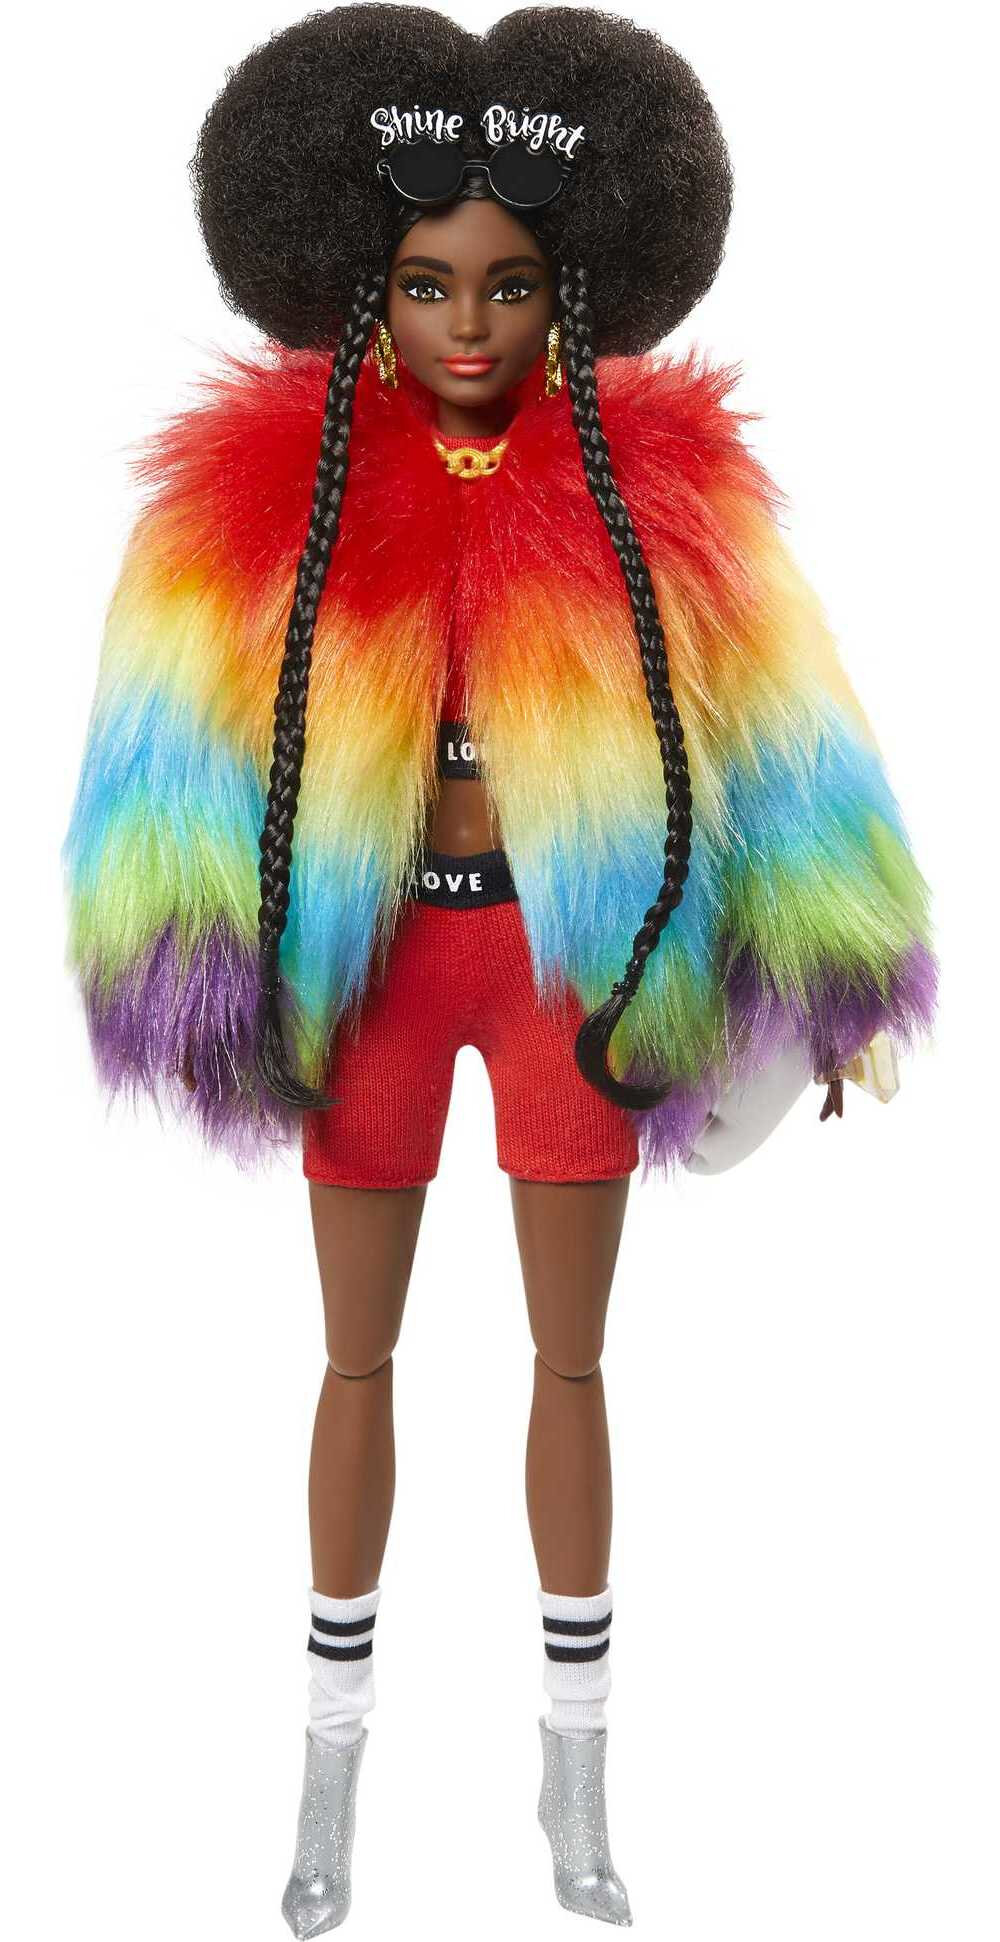 Barbie Extra Fashion Doll with Afro-Puffs in Shaggy Rainbow Coat with Accessories & Pet - image 1 of 8